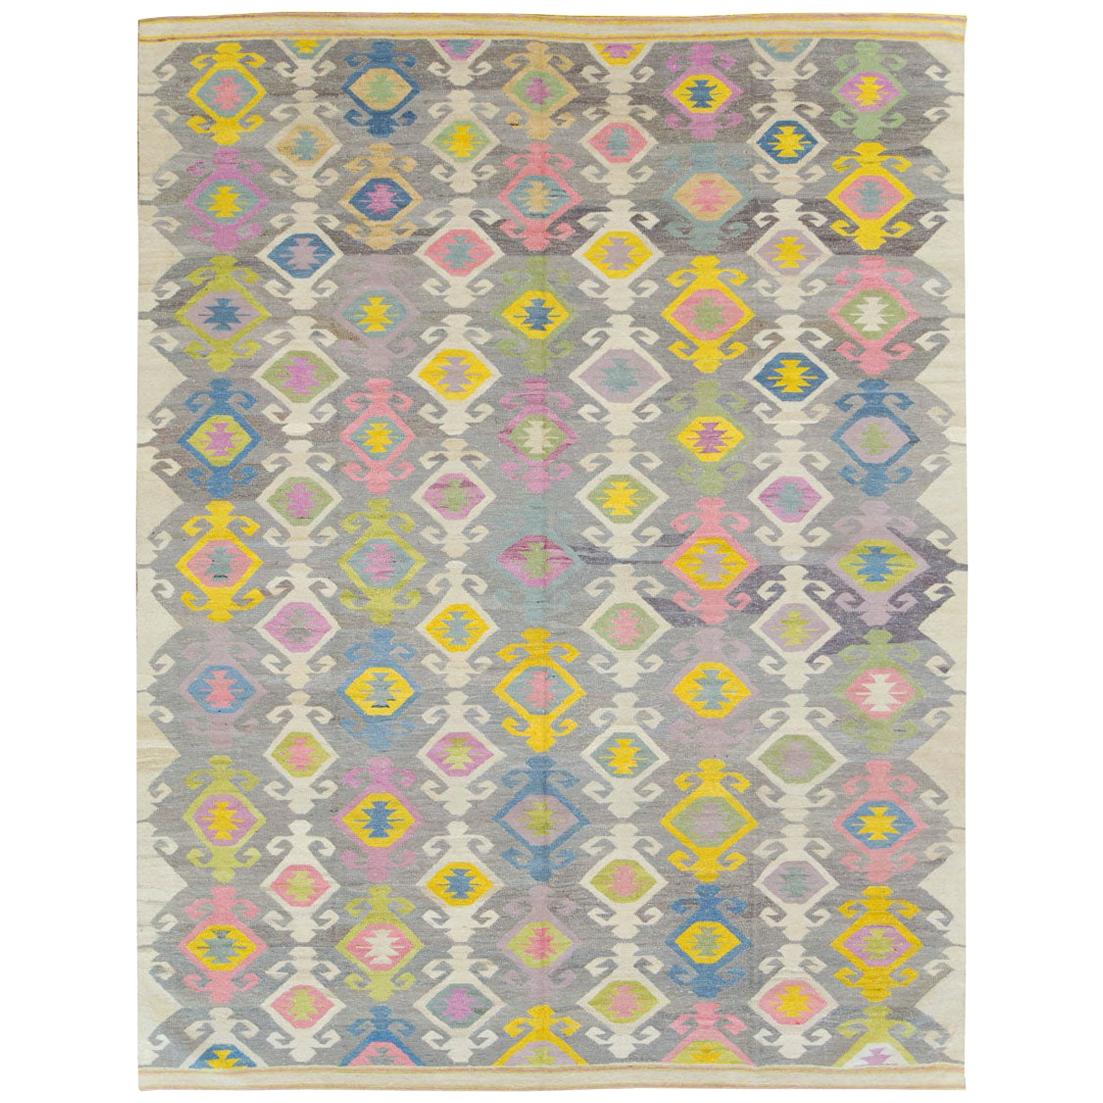 Contemporary Handmade Flat-Weave Rug in Grey Beige Yellow Pink Blue Green